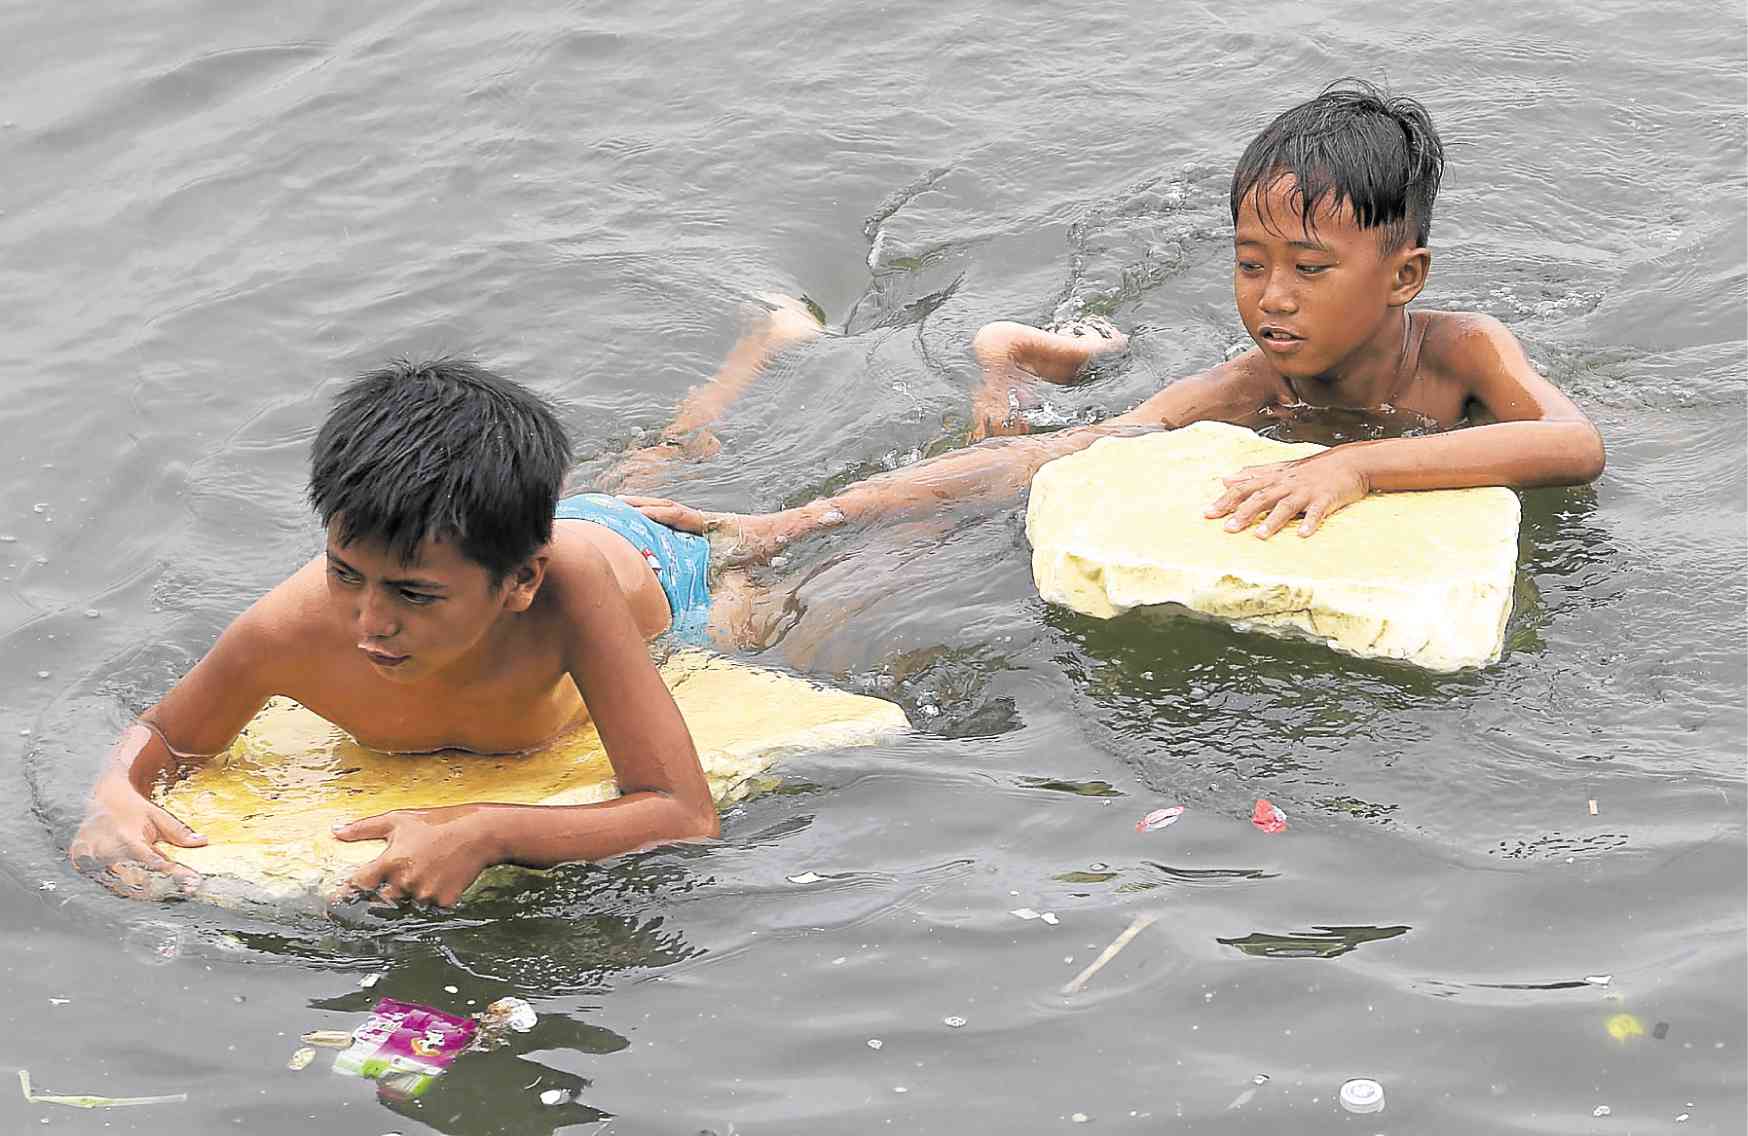 Solon: Water concessionaires should help in bay cleanup